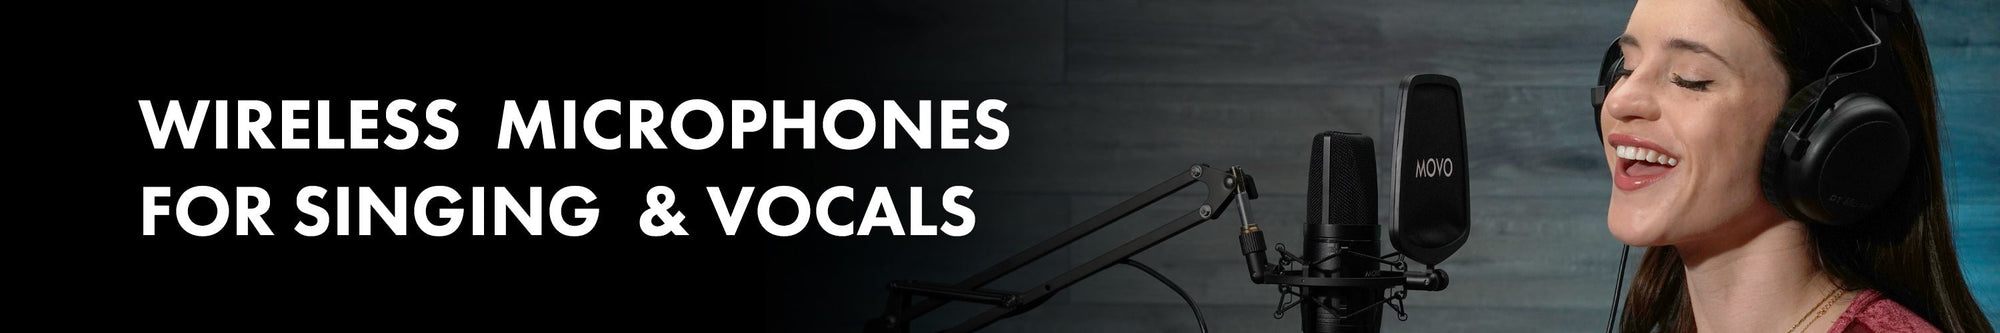 Wireless Microphones for Singing & Vocals - Movo